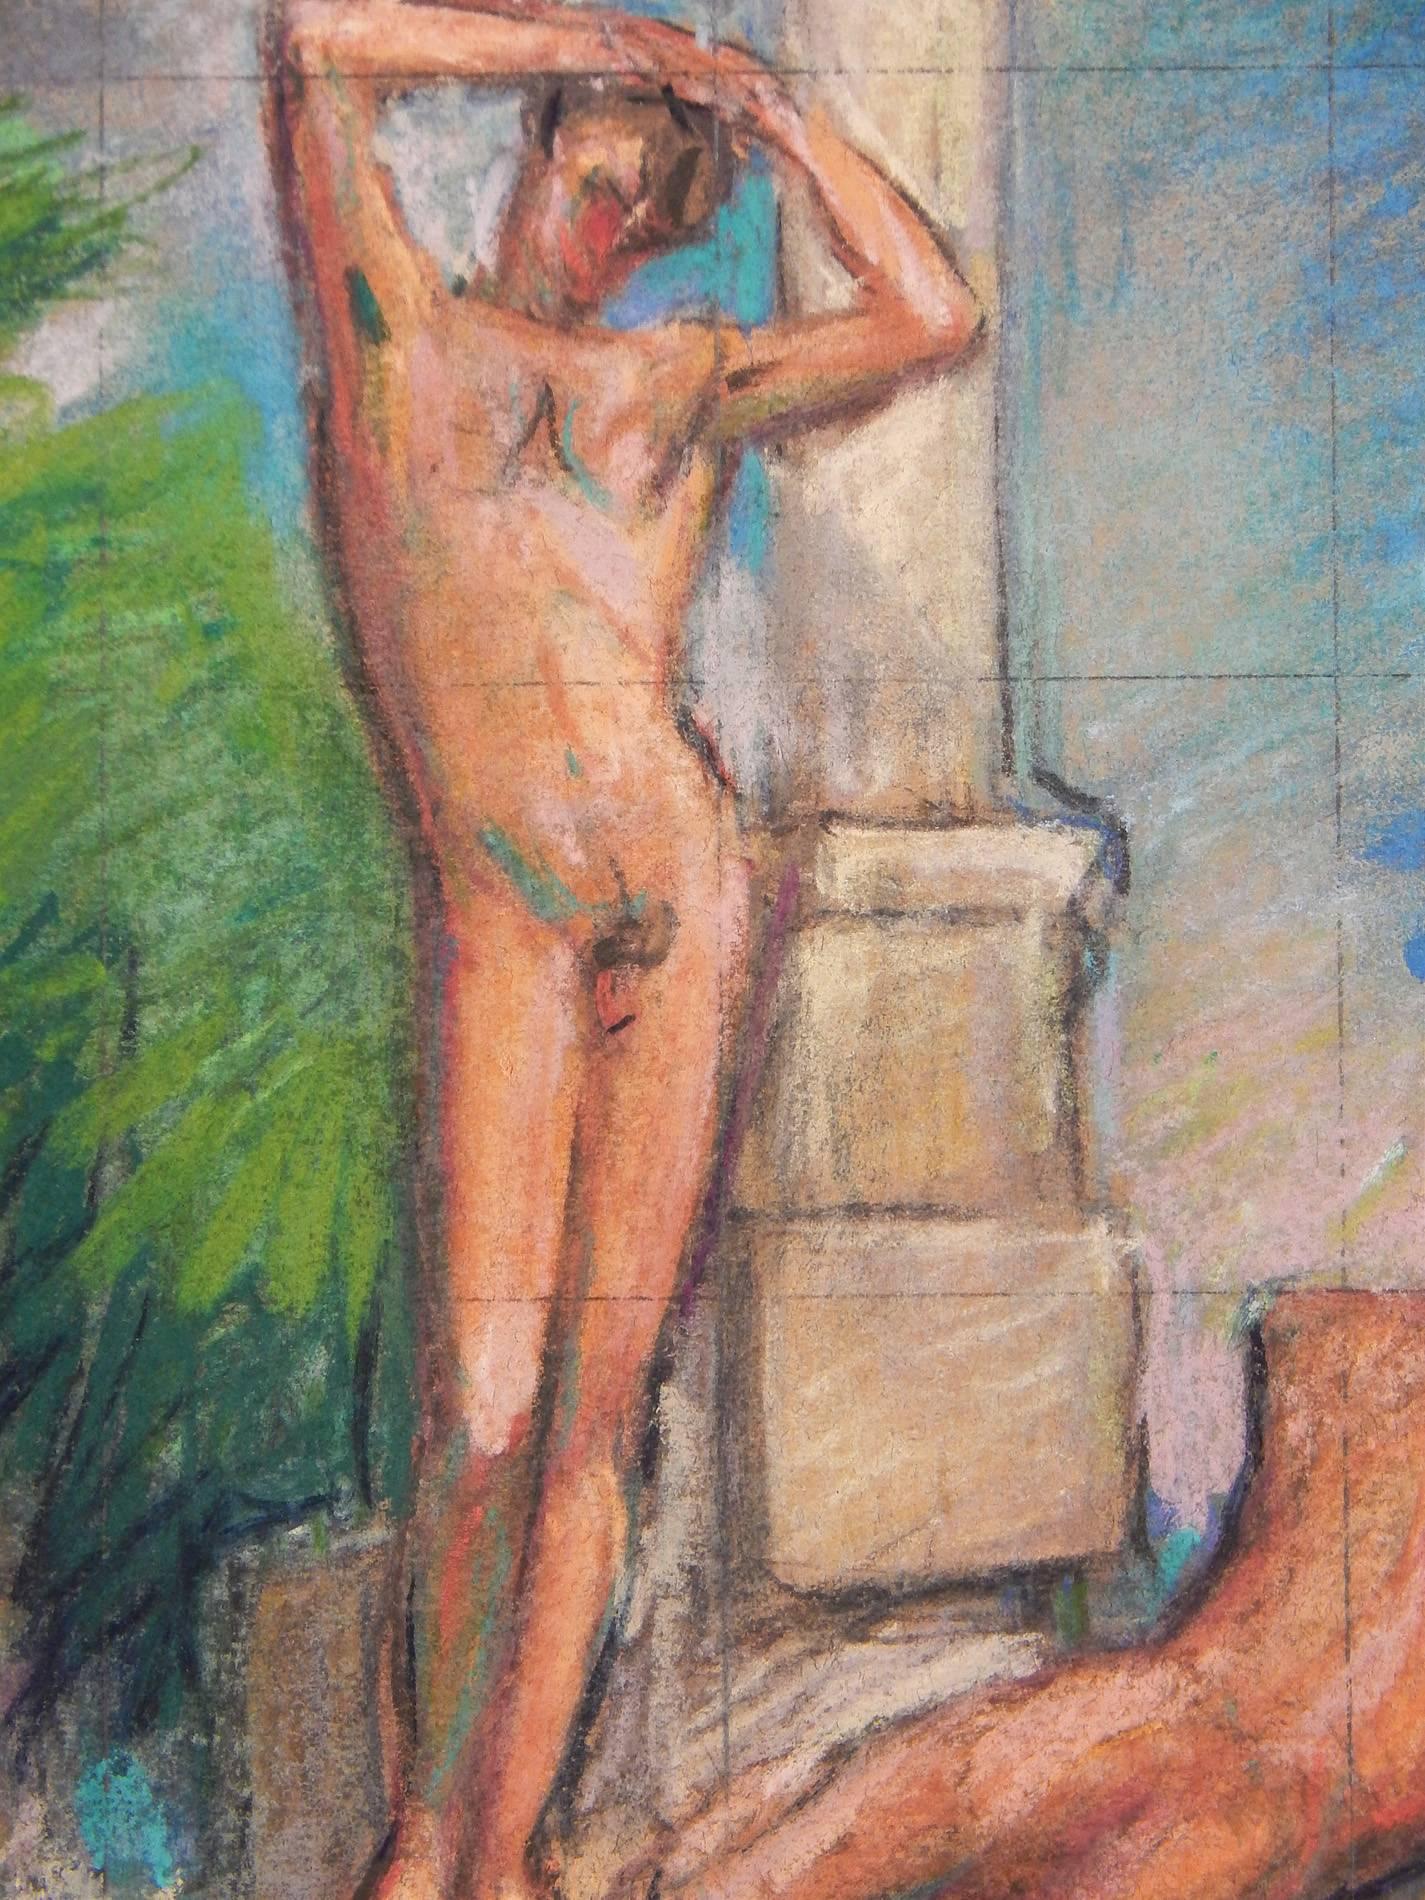 This sun-drenched scene, drawn with a vivid palette of bright Mediterranean blues and chalk whites, shows a pattern of gridding by the artist, indicating that this drawing served as a preparatory sketch for a mural, probably for a domestic setting.